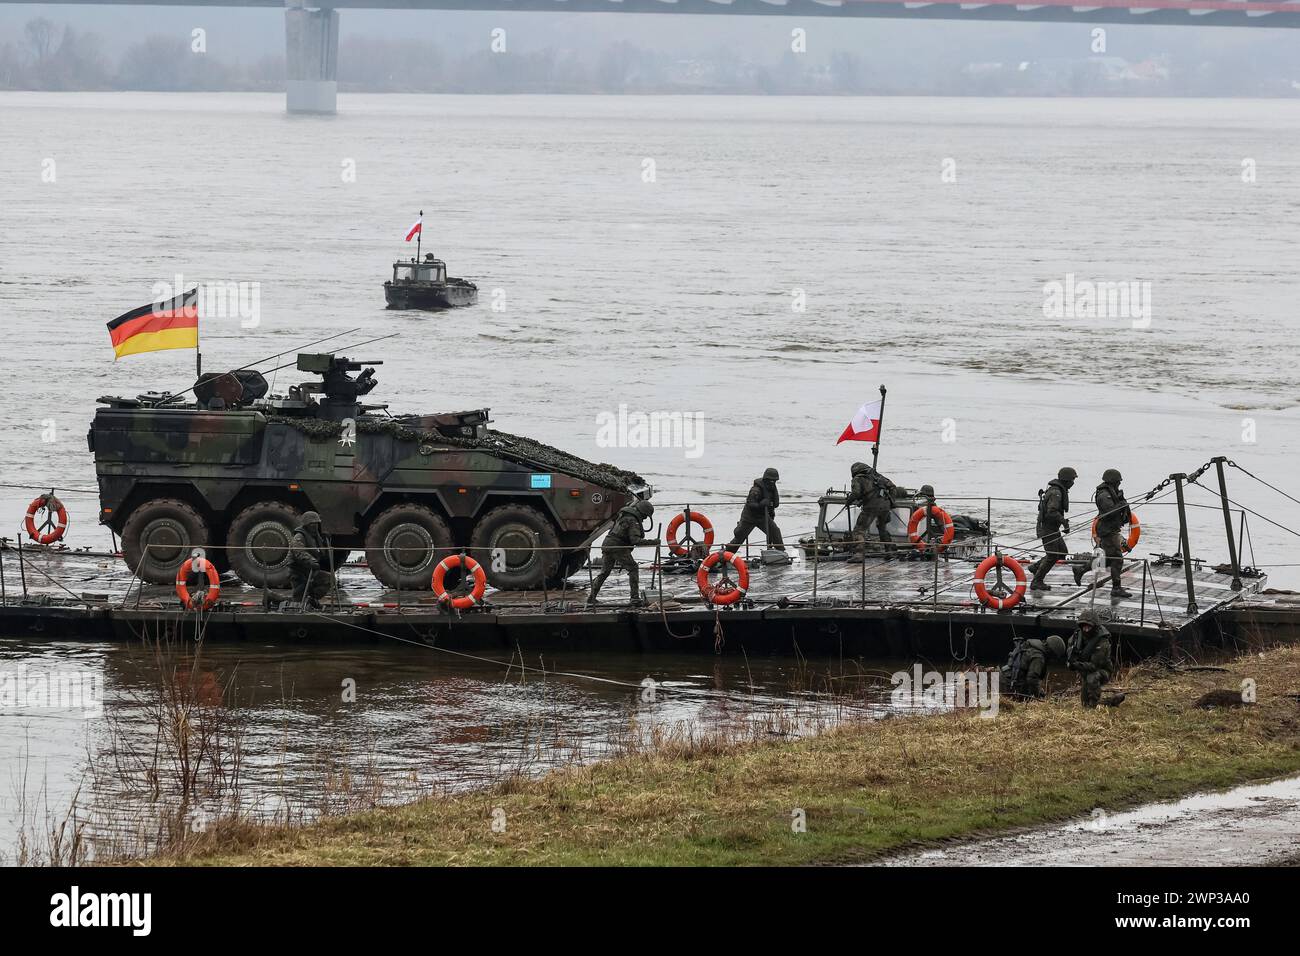 Korzeniewo, Pomorskie, Poland on March 5, 2024. German servicemen present transfer of tanks and armored vehicles via Vistula river during NATO's Dragon-24 exercise, a part of large scale Steadfast Defender-24 exercise. The exercises, which take place mainly in Central Europe, involve some 90,000 troops from all NATO countries as well as Sweden. The aim of Steadfast Defender-24 is to deter and present defensive abilities in the face of aggression. Credit: Dominika Zarzycka/Alamy Live News Stock Photo